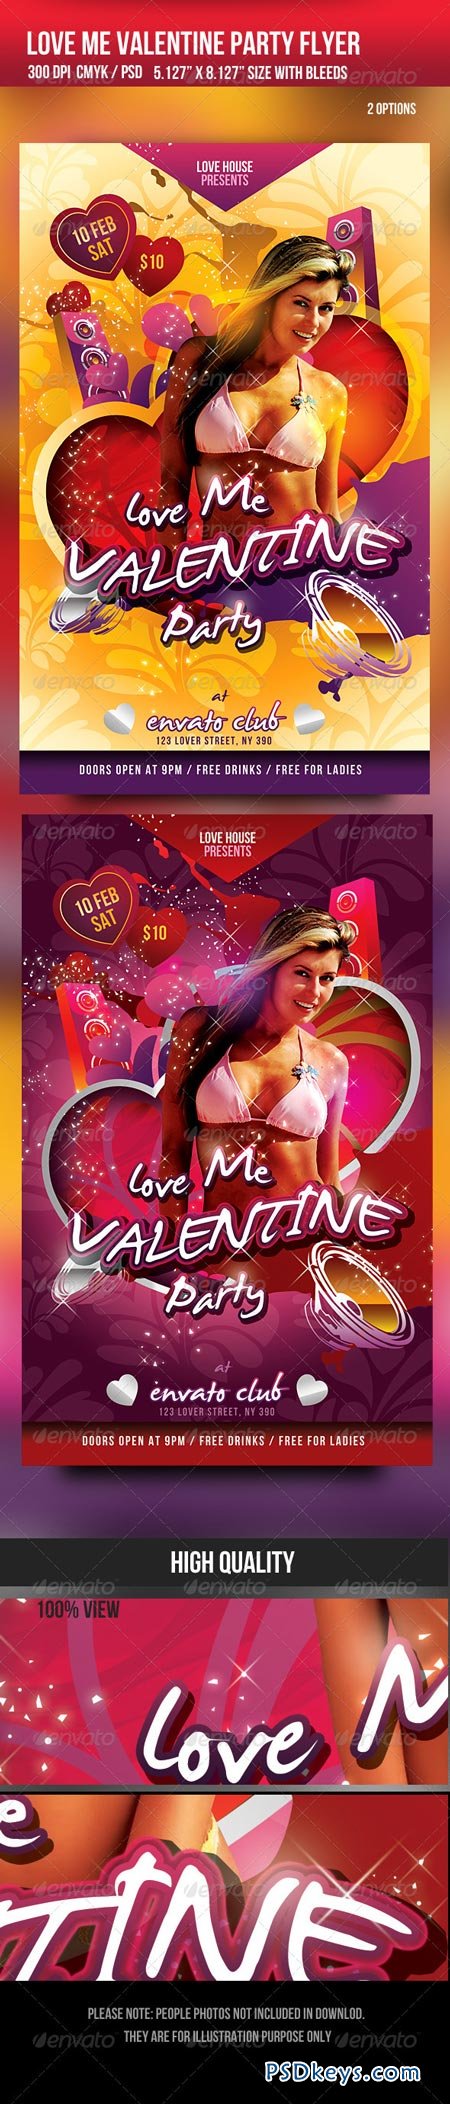 Love me Valentine Day Party Flyer 1254711